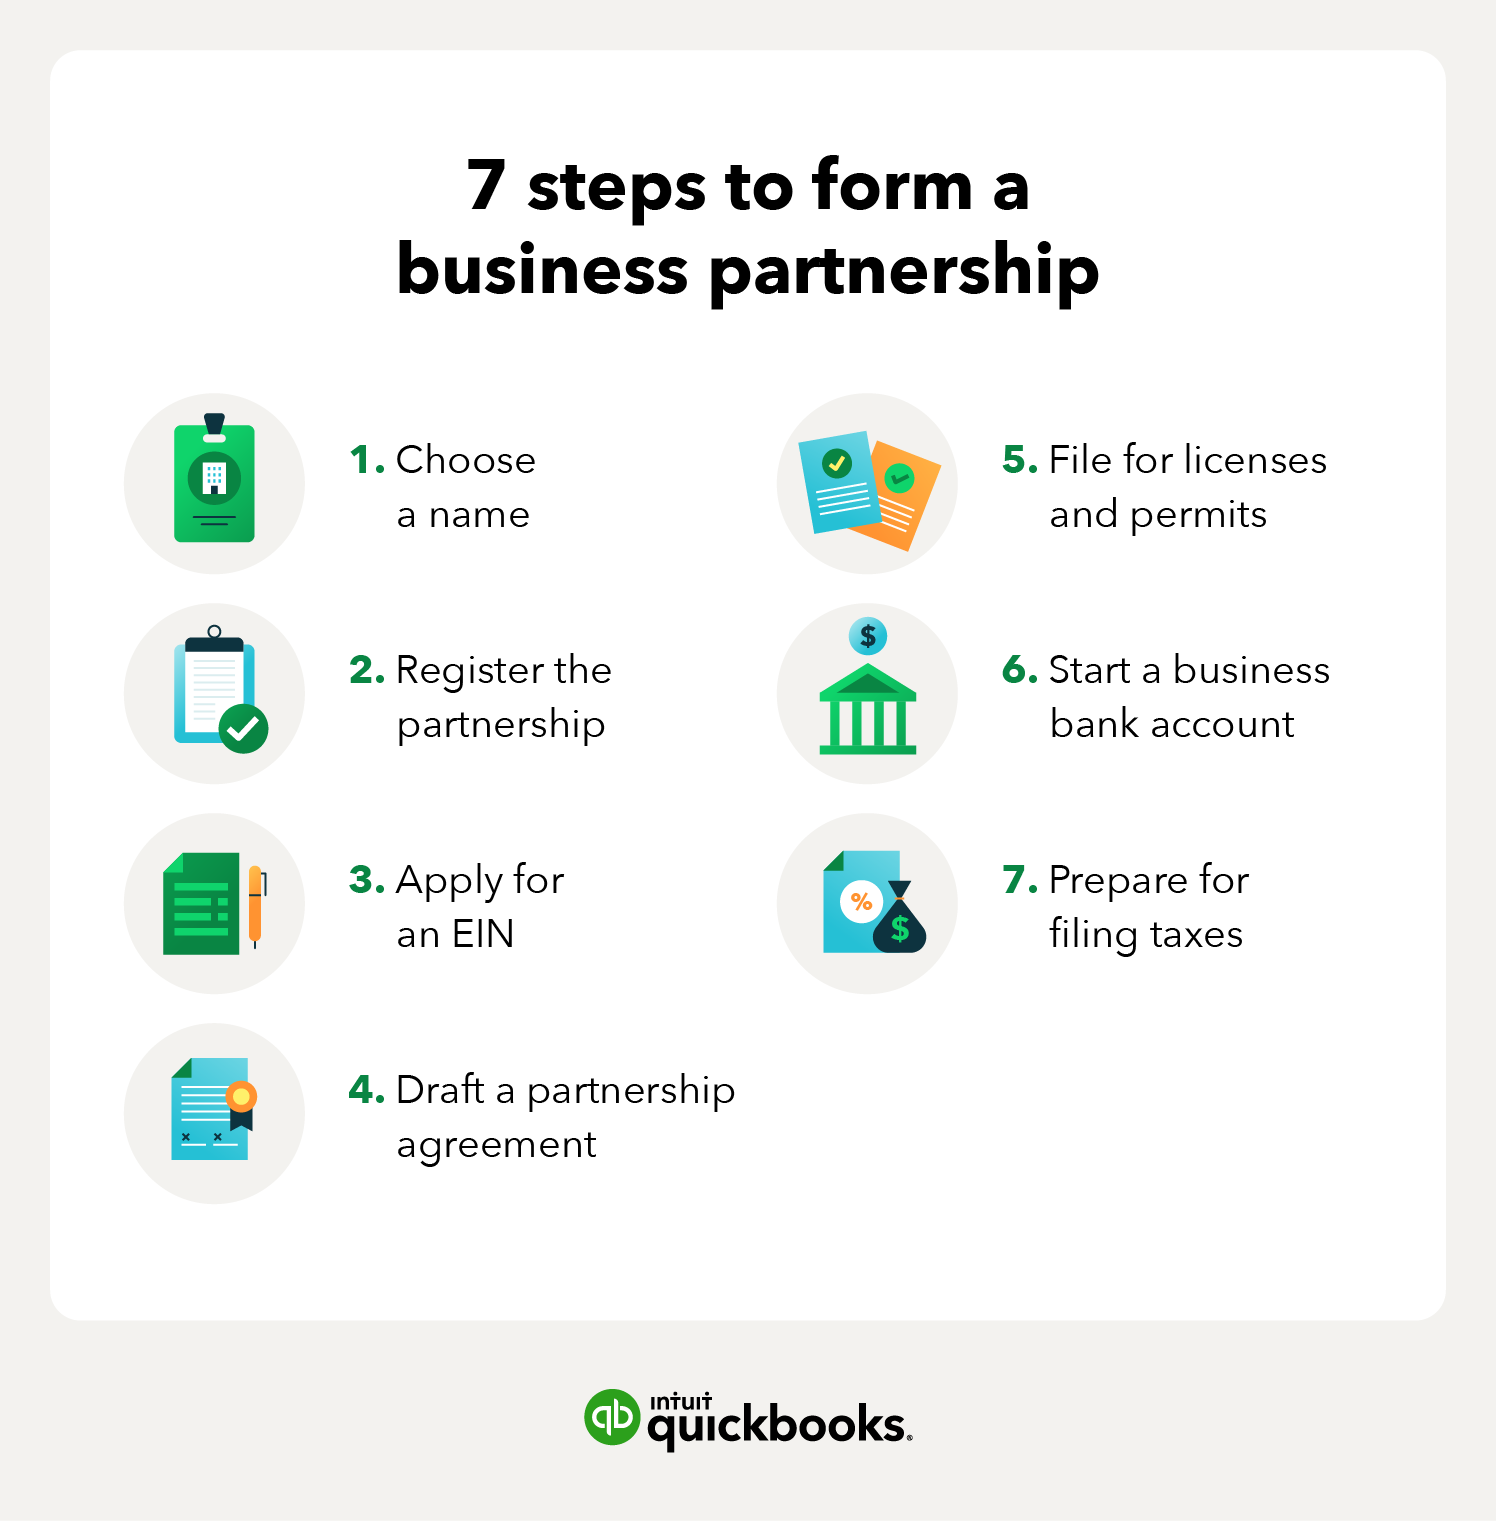 Numbered list showing the 7 steps to form a business partnership. 1: Choose a name for the partnership. 2: Register the partnership. 3: Apply for an Employer Identification Number (EIN). 4: Draft a partnership agreement. 5: File for any licenses or permits required by your state or local government. 6: Start a business bank account for business expenses. 7: Prepare for filing taxes.